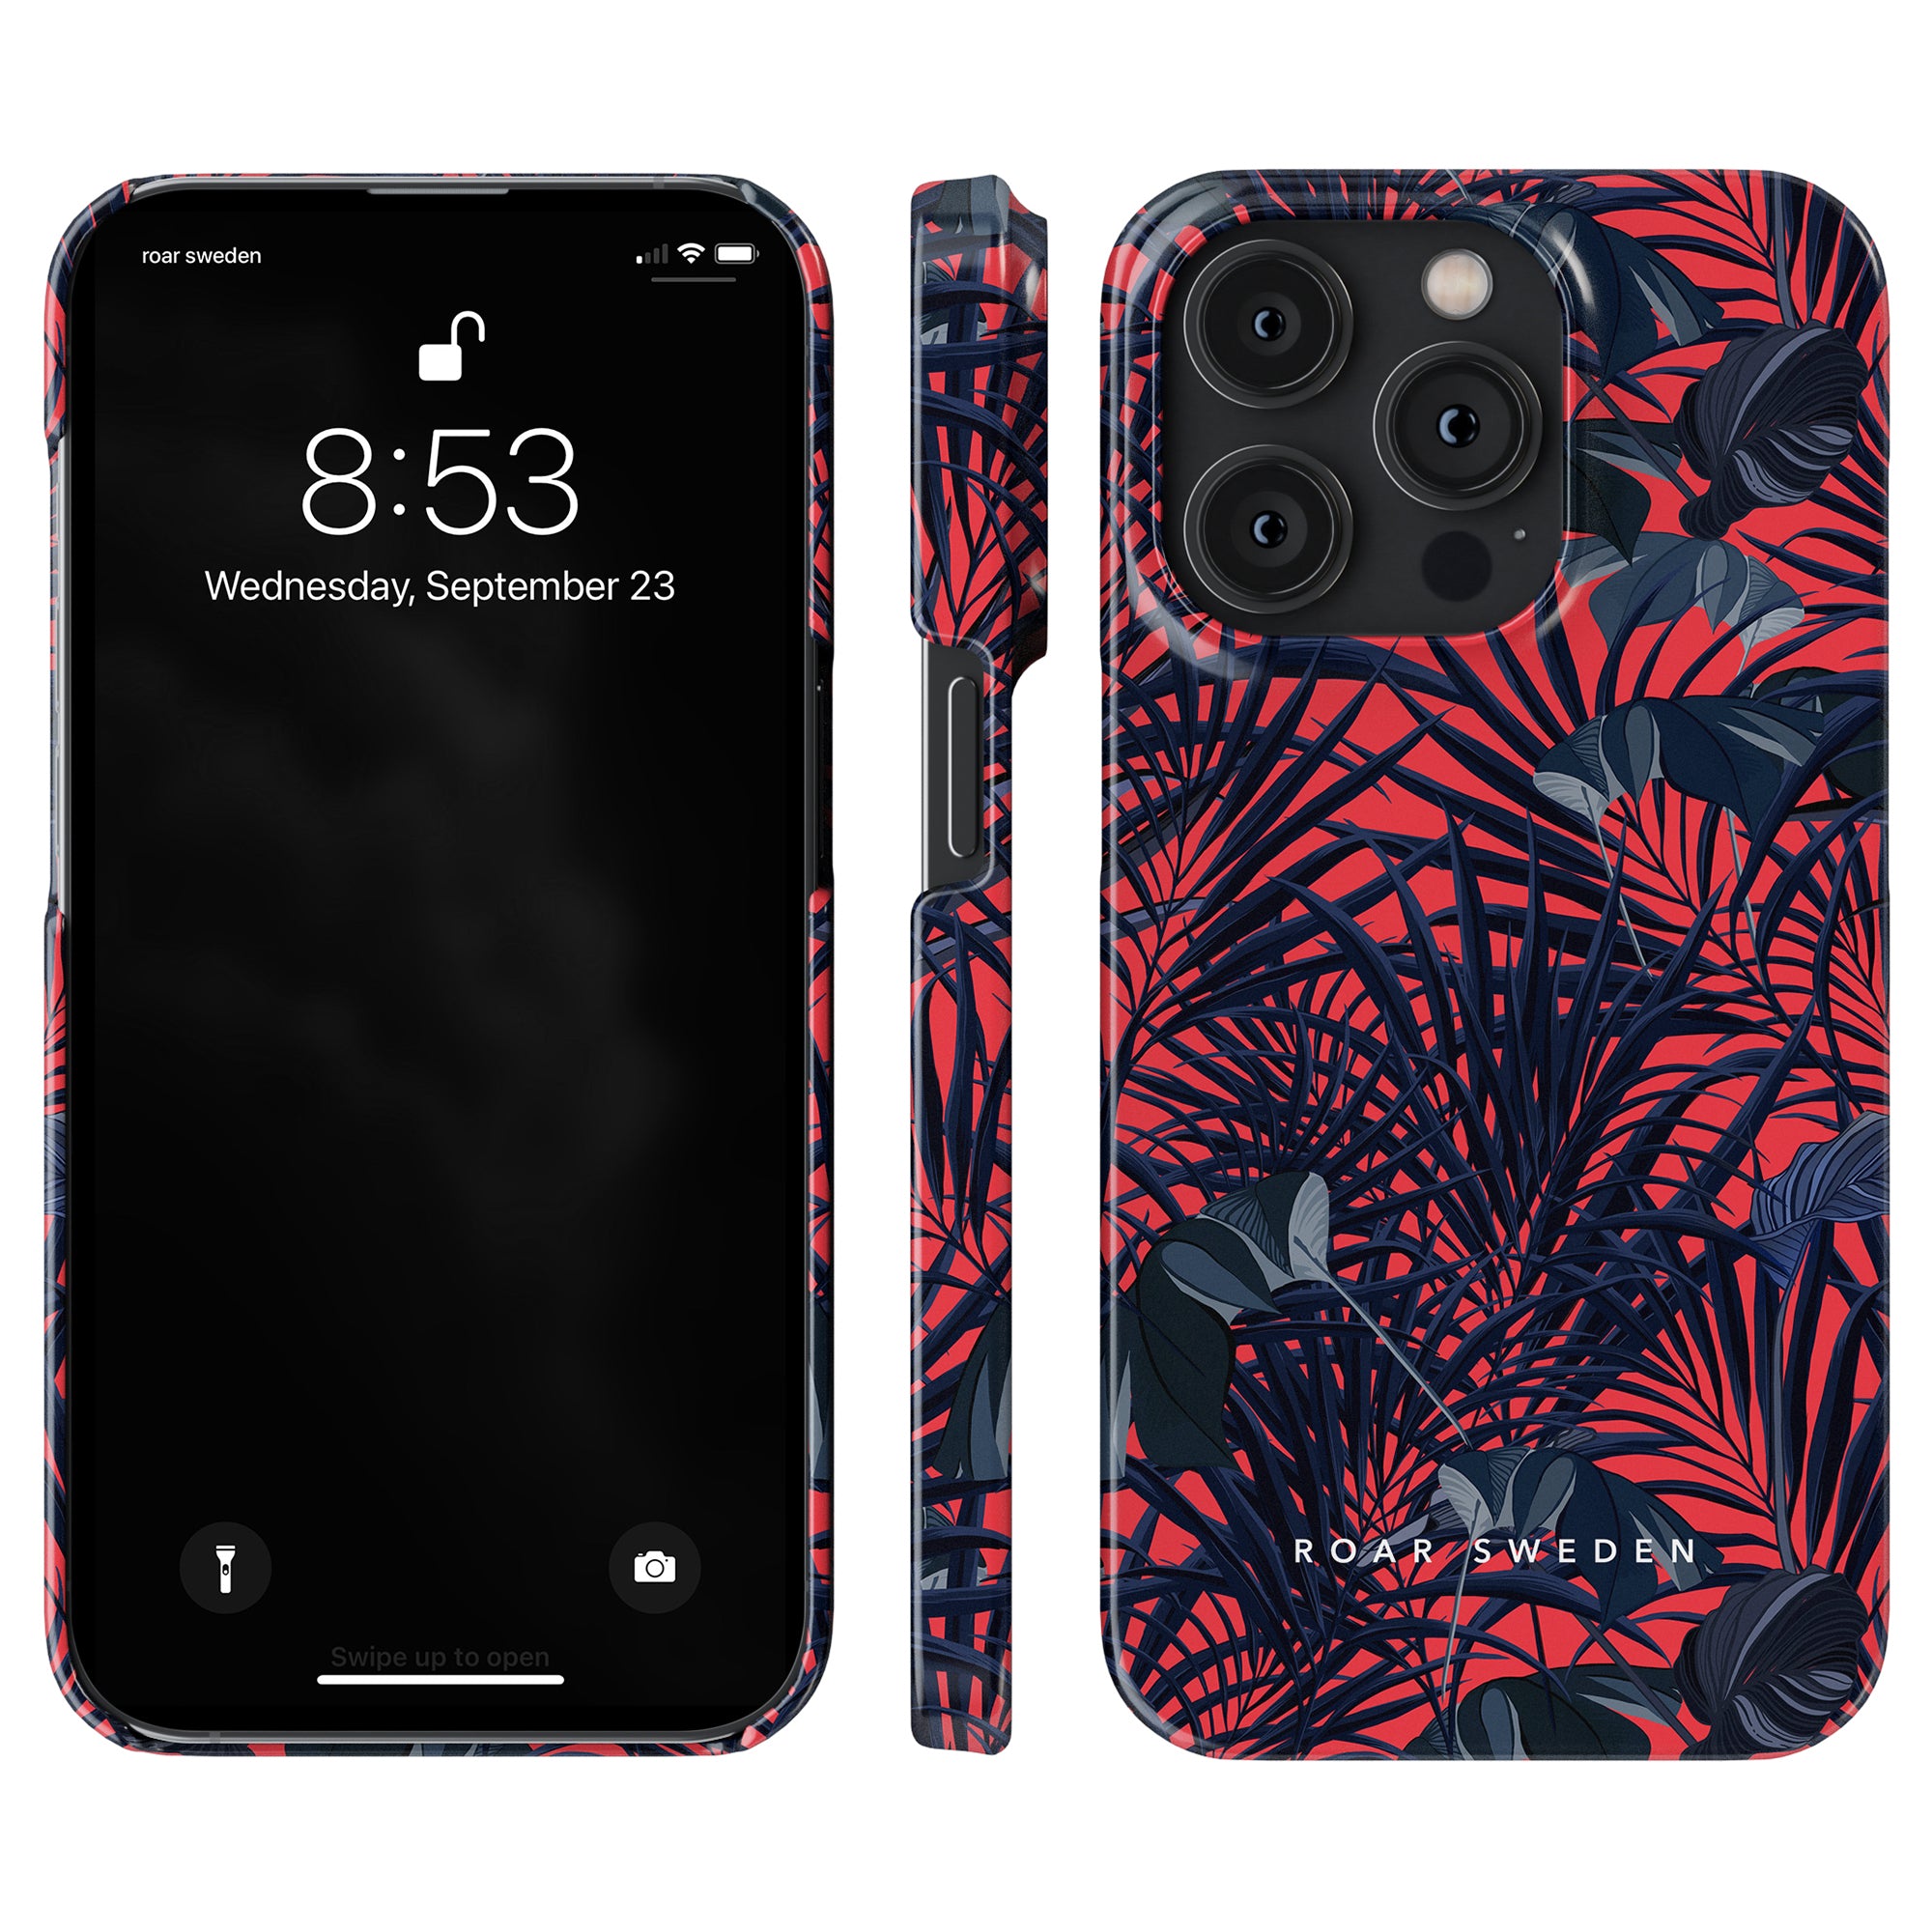 A smartphone with a Red Tropics - Slim case from Roar Sweden, featuring a Red Tropics design from the Jungle Collection, shows the time as 8:53 on Wednesday, September 23. The case is red and black with intricate tropical leaf patterns.